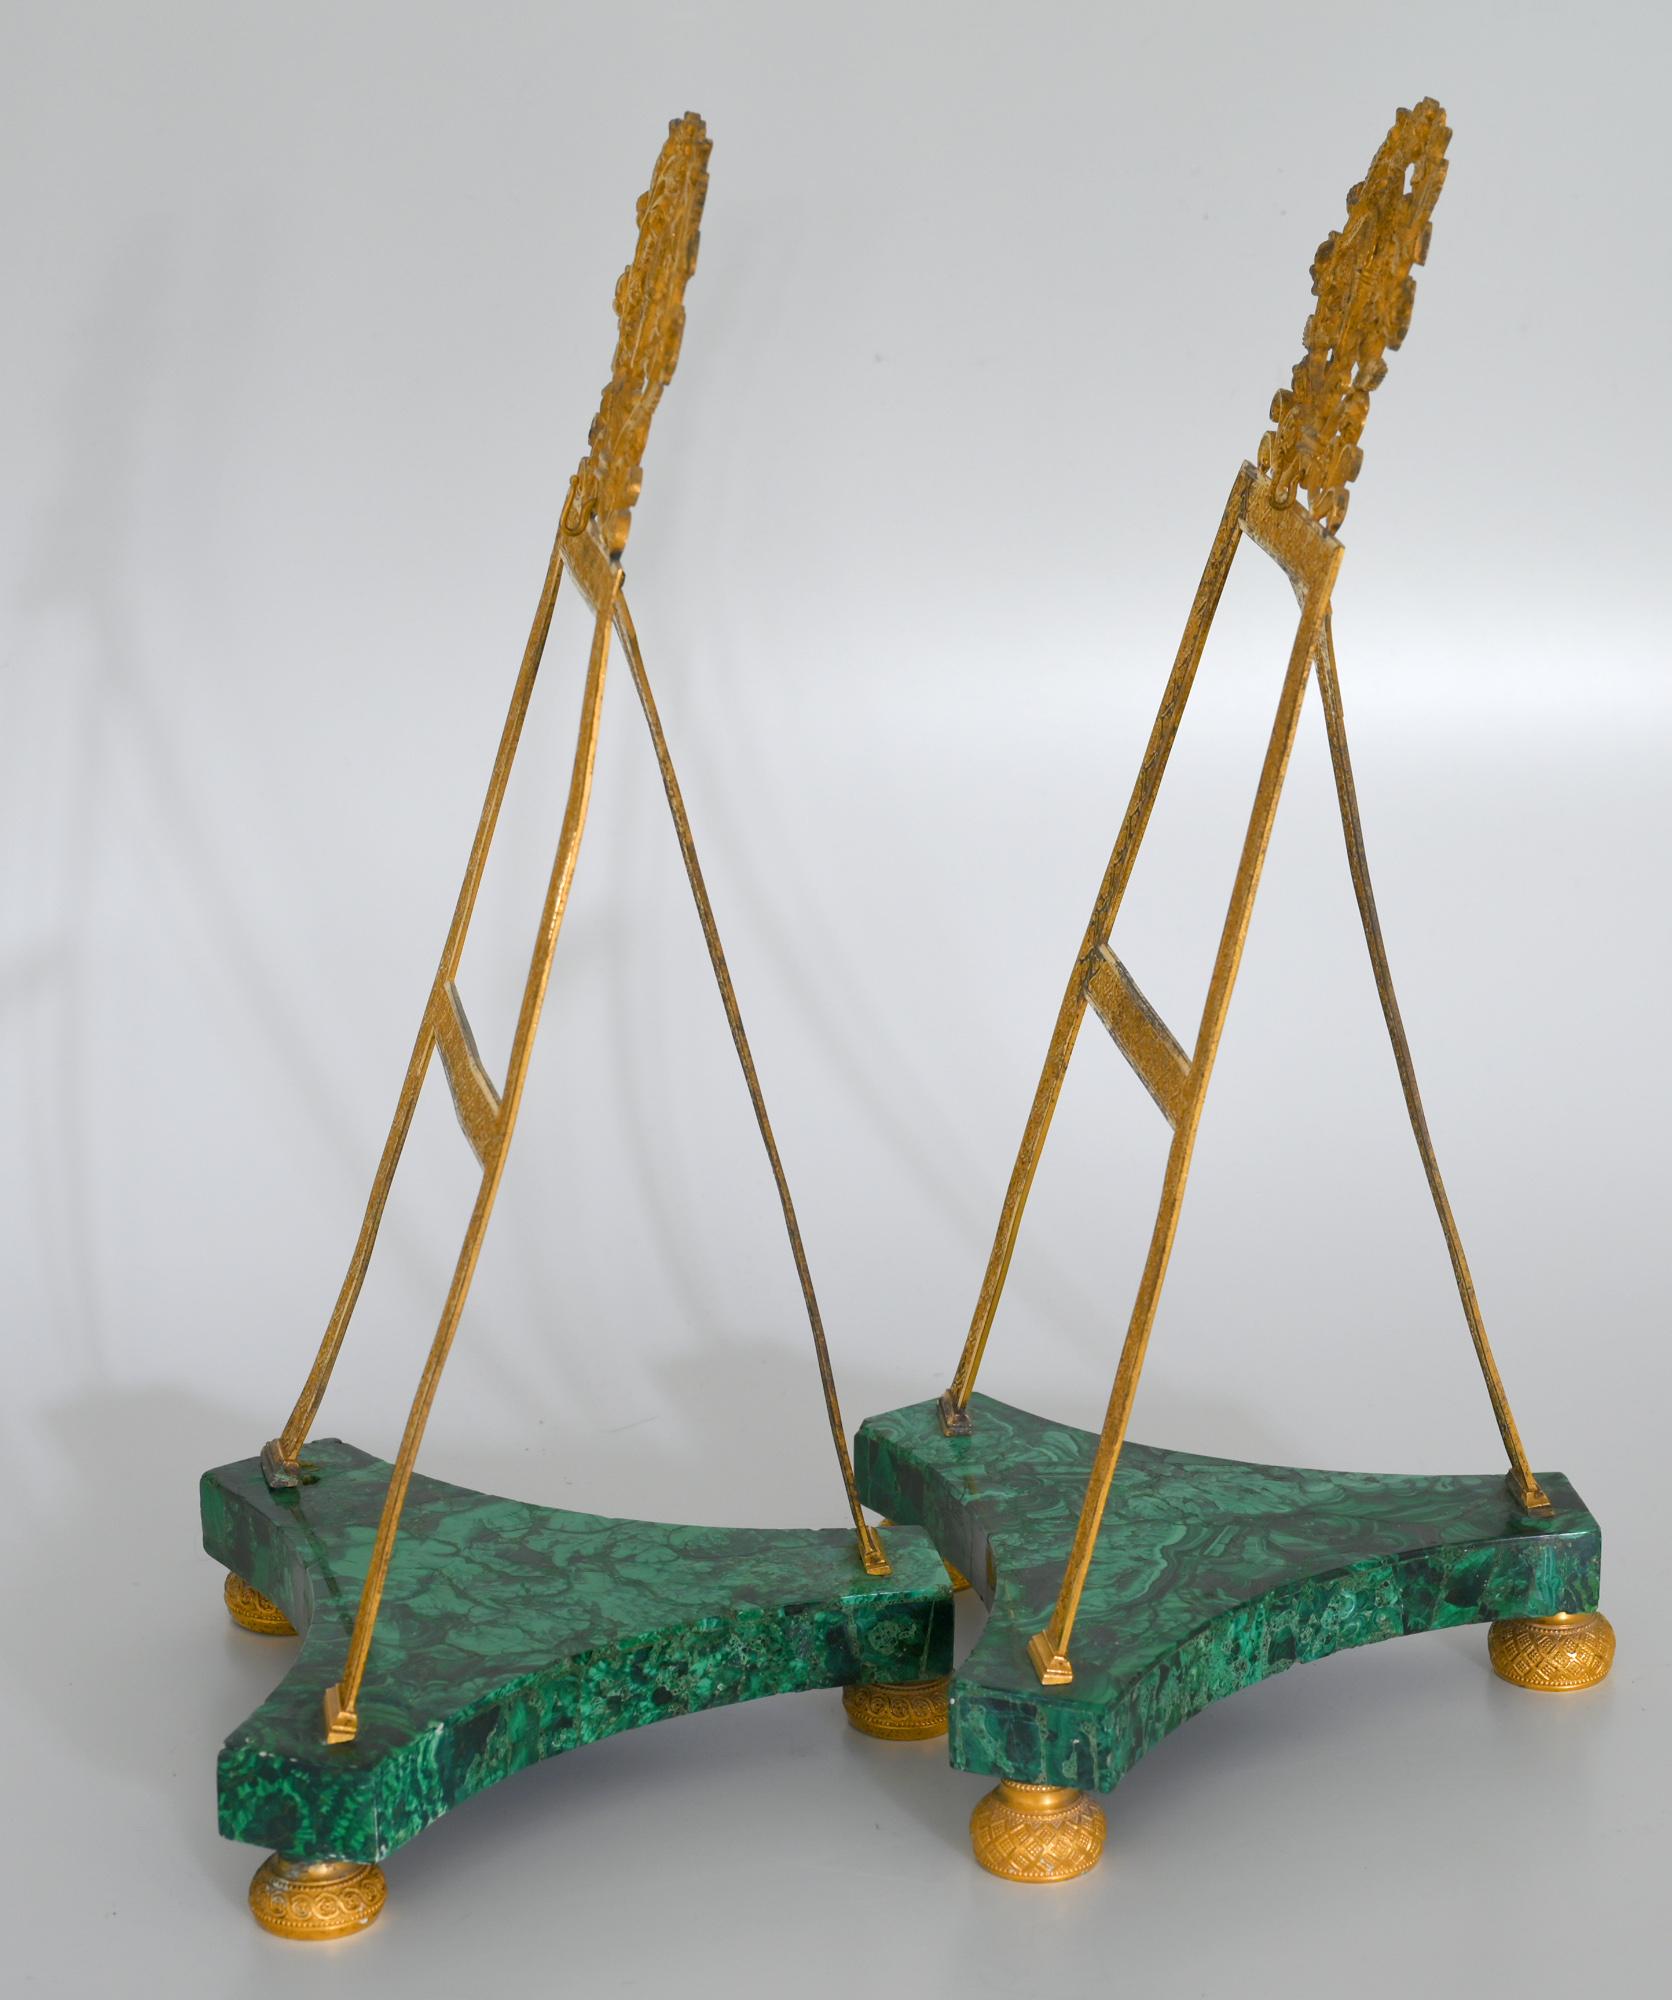 Pair of malachite stands, St.Petersburg early 19th century, fire gilded bronze 

Fire gilded bronze with an malachite base. The stands were made to suspend miniatures or the like. They are Russian luxury goods, which were made for the European